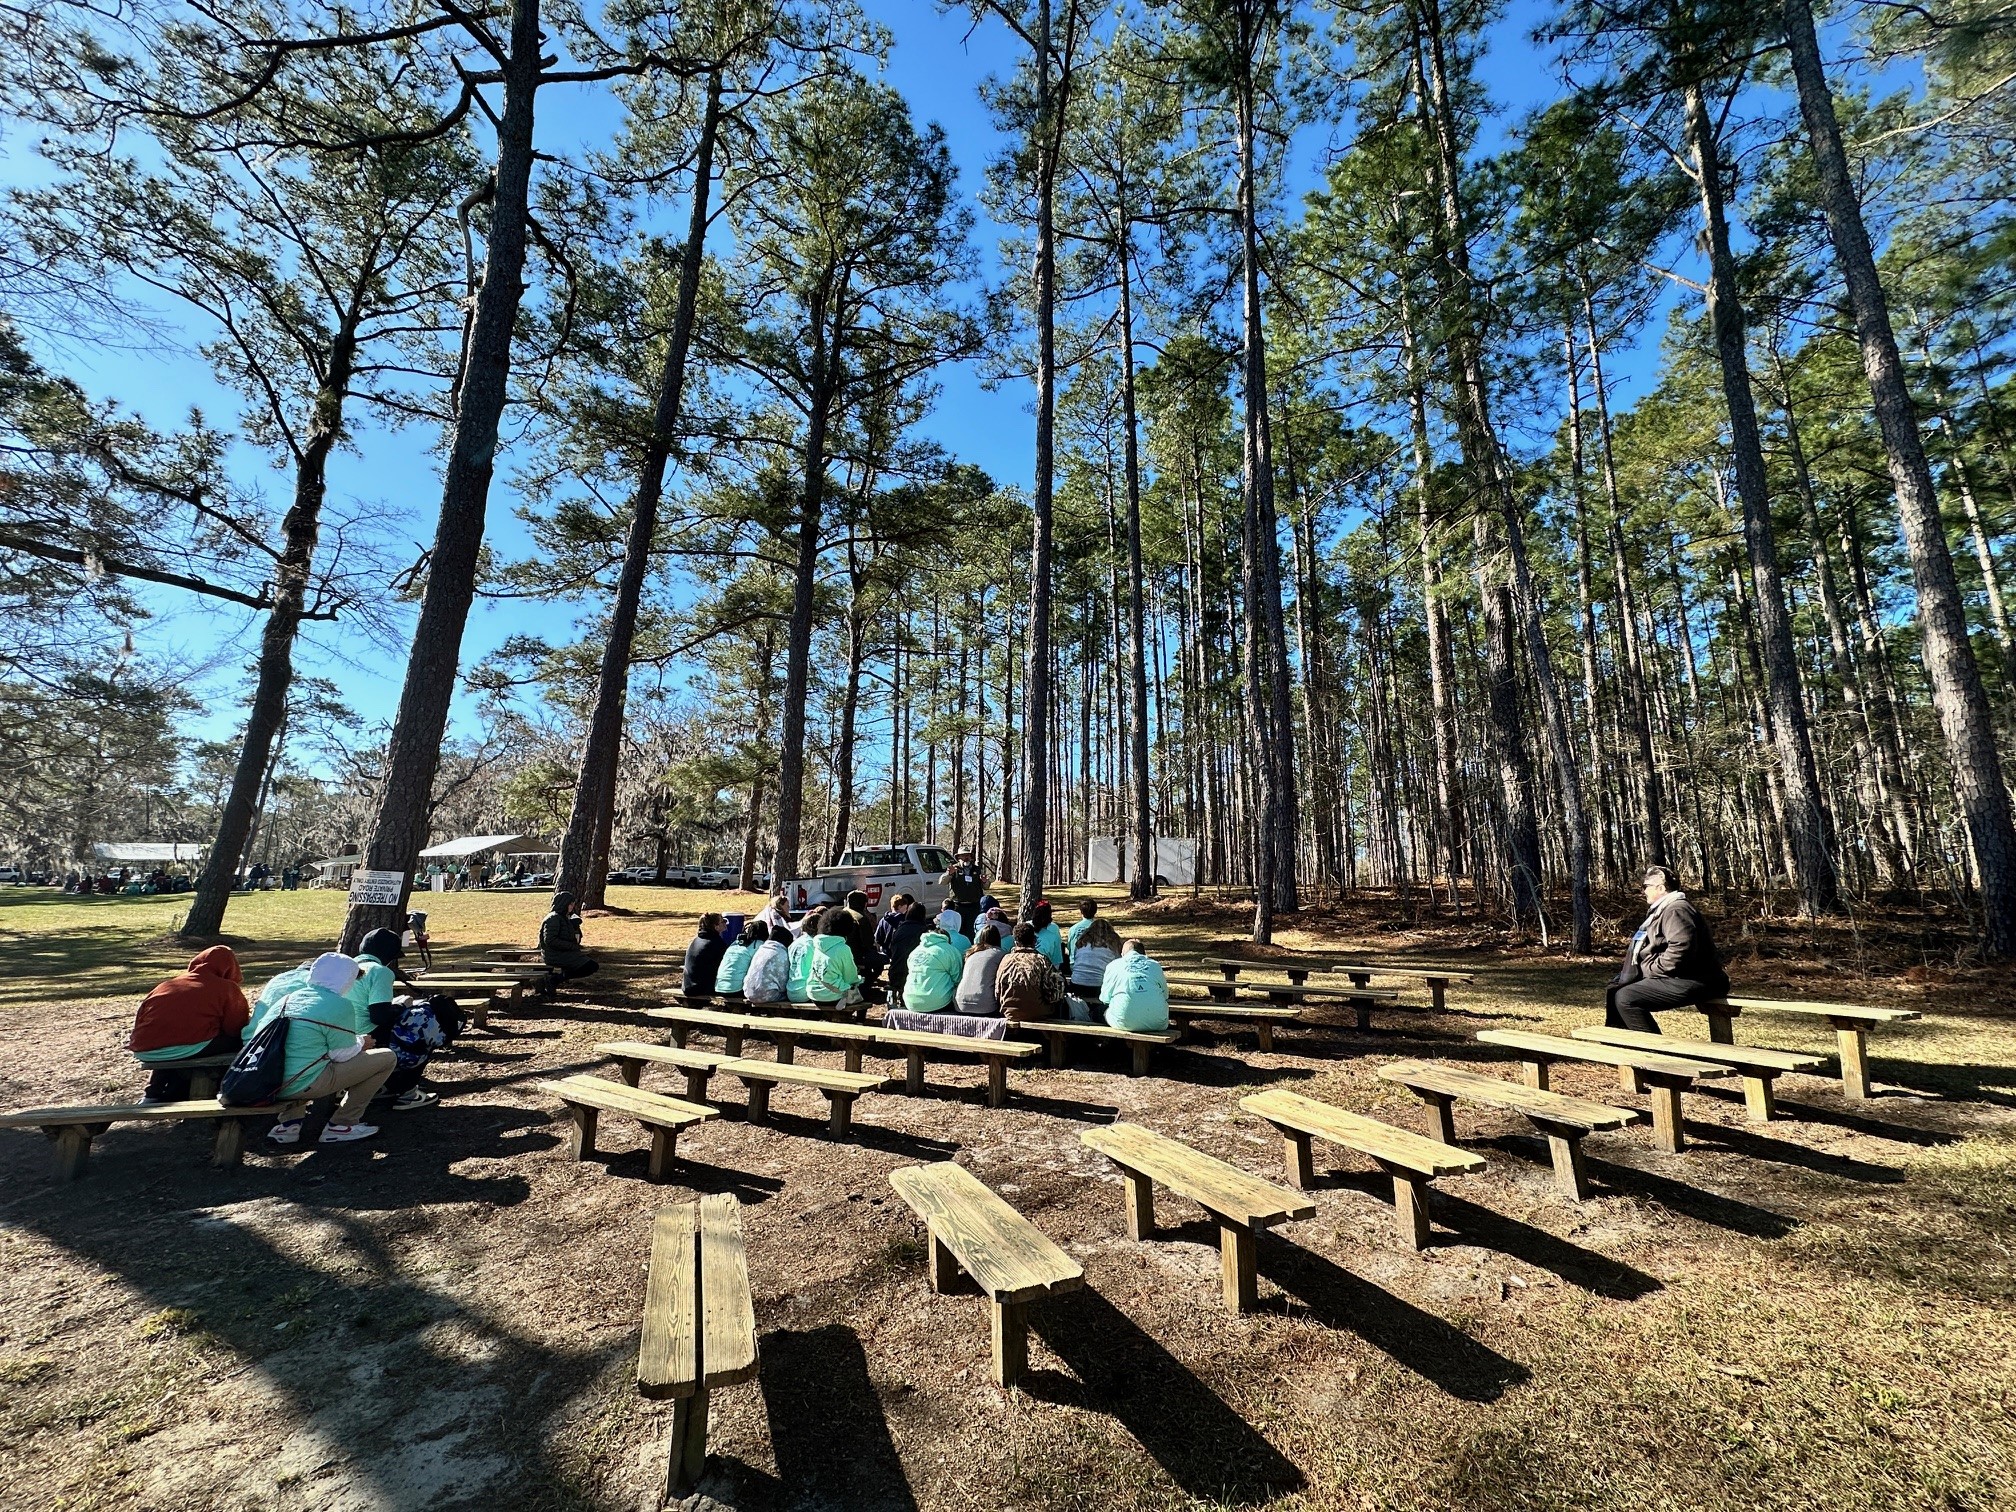 Image of groups of people learning about environmental science during the Envirothon. Benches are lining an area surrounded by trees with groups of poeple wearing turquoise shirts gathered together.